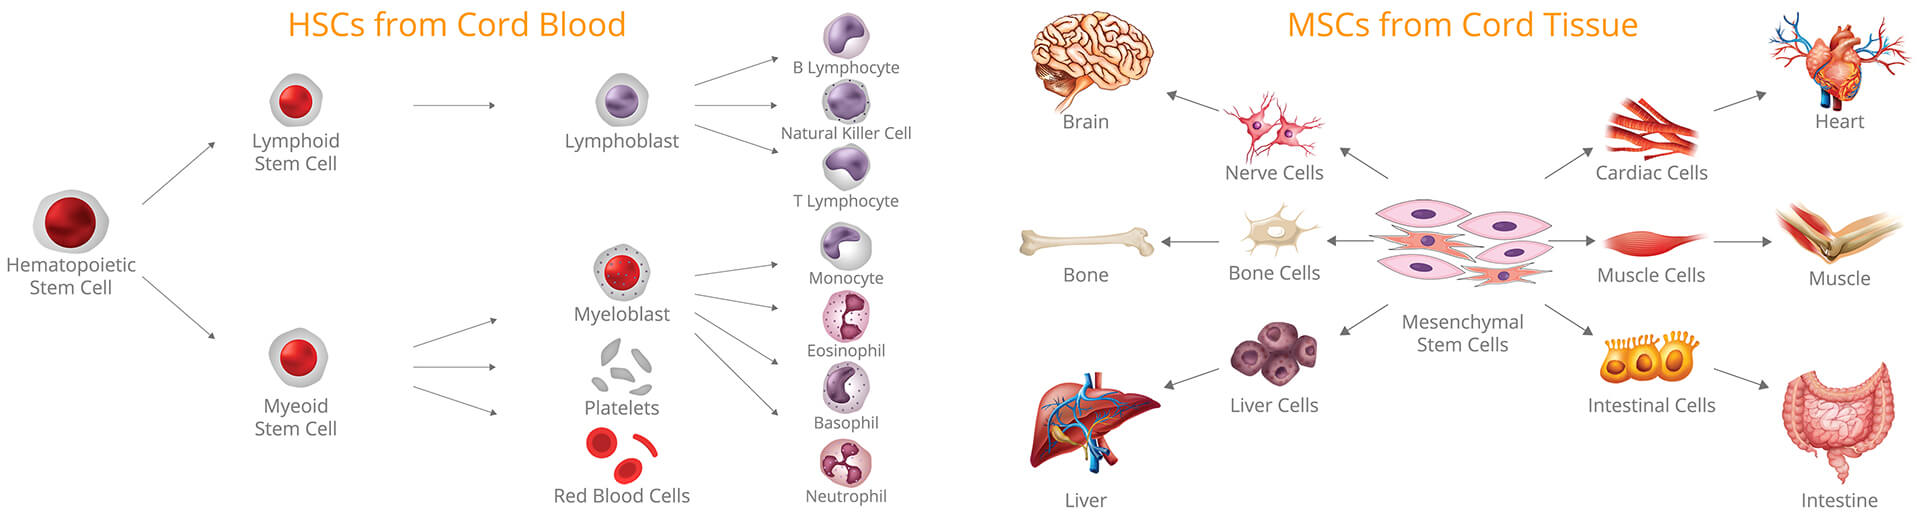 HSCs MSCs from Cord Blood Tissue